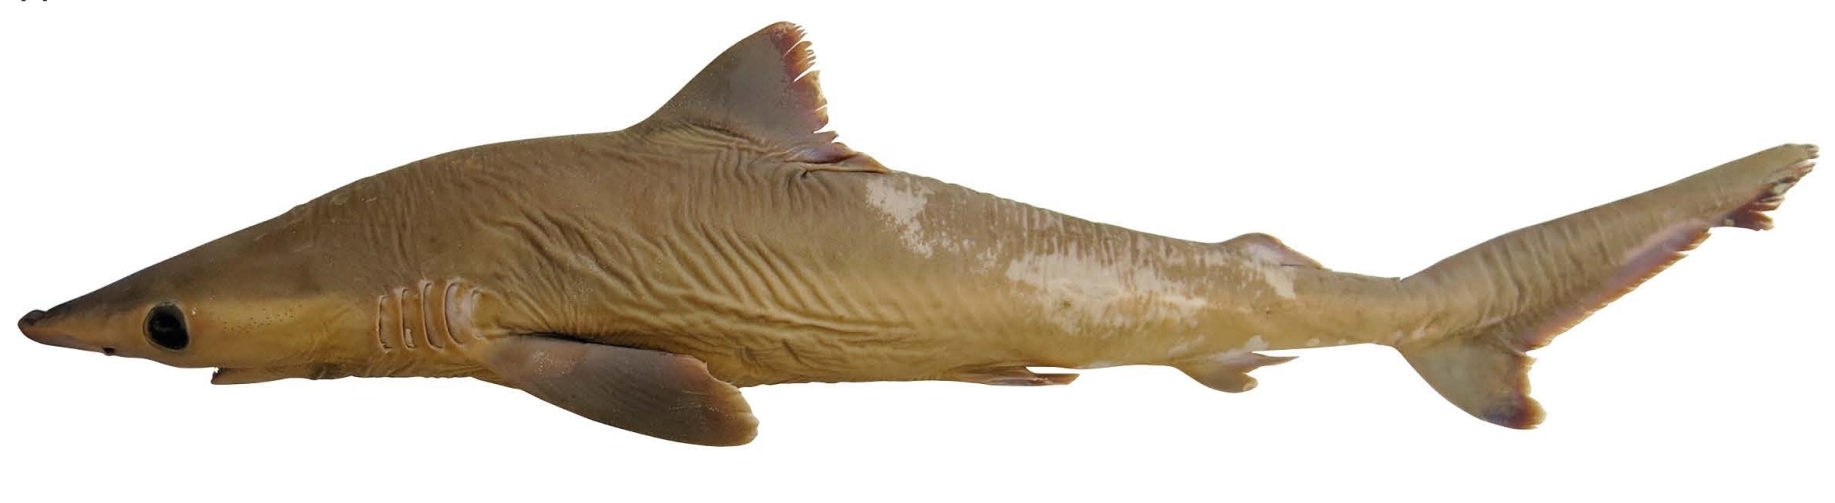 preserved shark specimen, shown head-to-tail from the side on a white background.